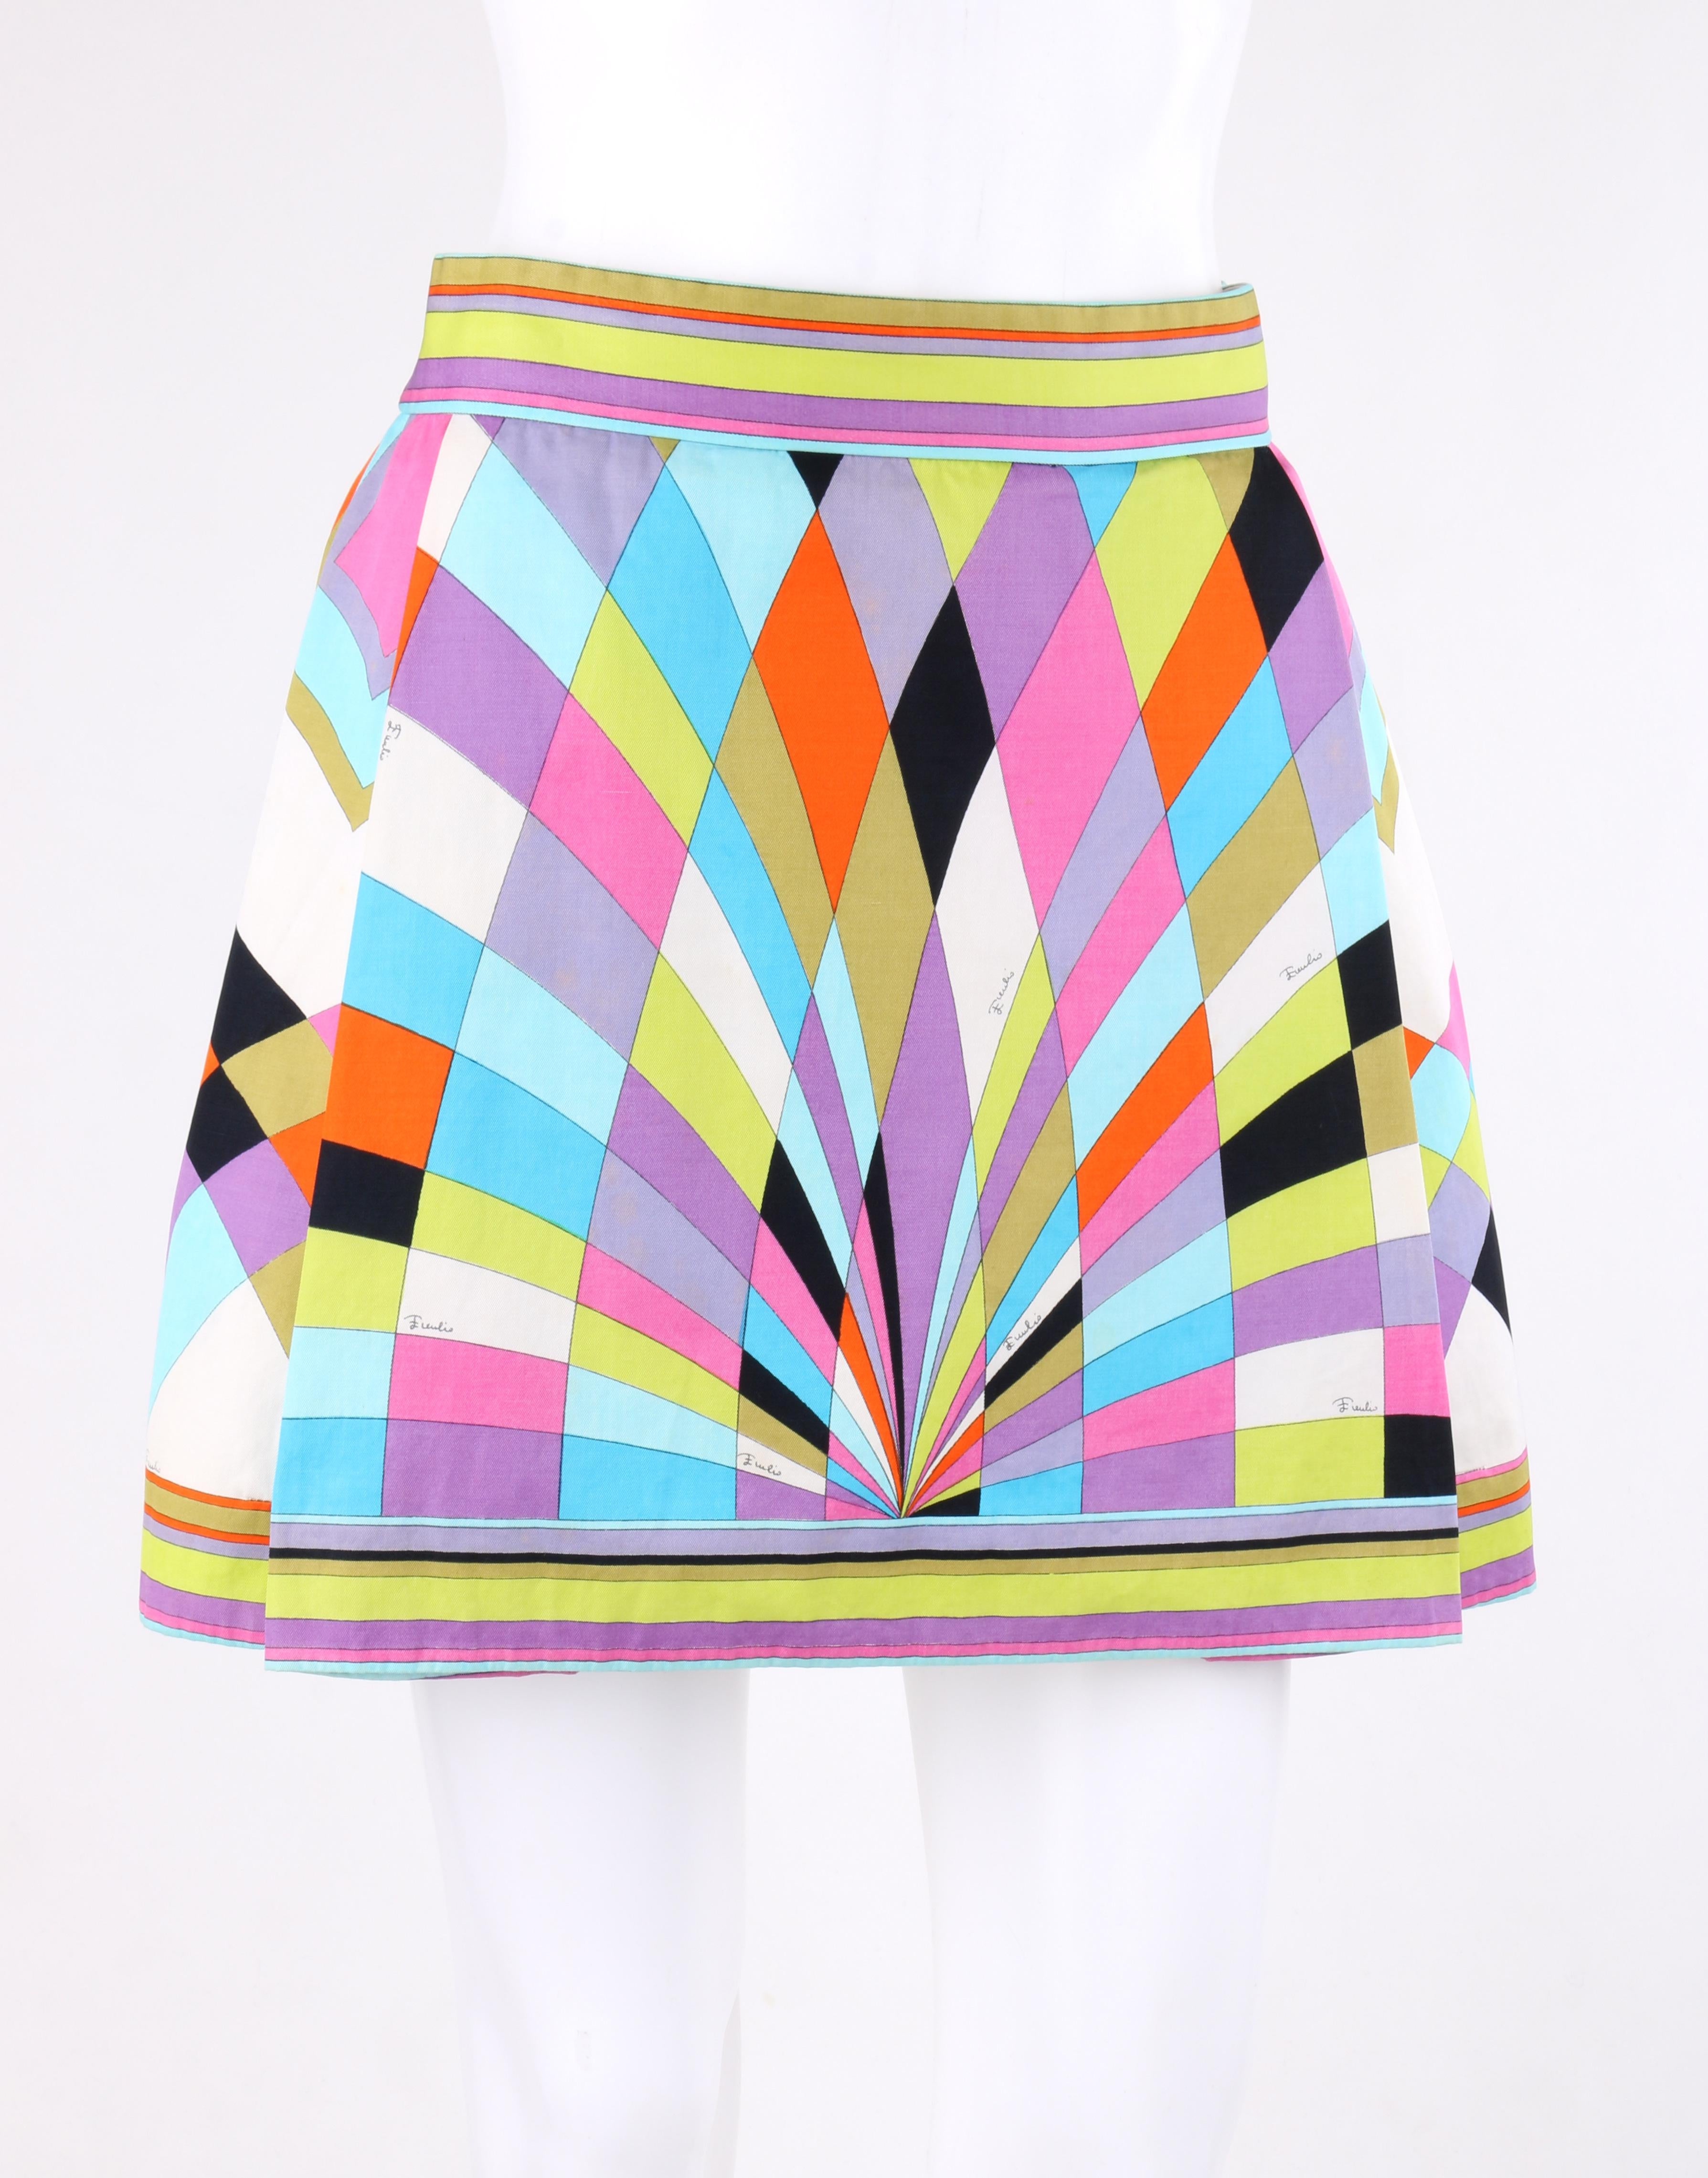 EMILIO PUCCI c.1965 Multicolor Geometric Signature Print A-Line Mini Skirt
 
Circa: c.1965
Label(s): Emilio Pucci & Exclusively for Saks Fifth Avenue
Style: Mini skirt
Color(s): Shades of pink, purple, orange, green, blue, black, and white
Lined: